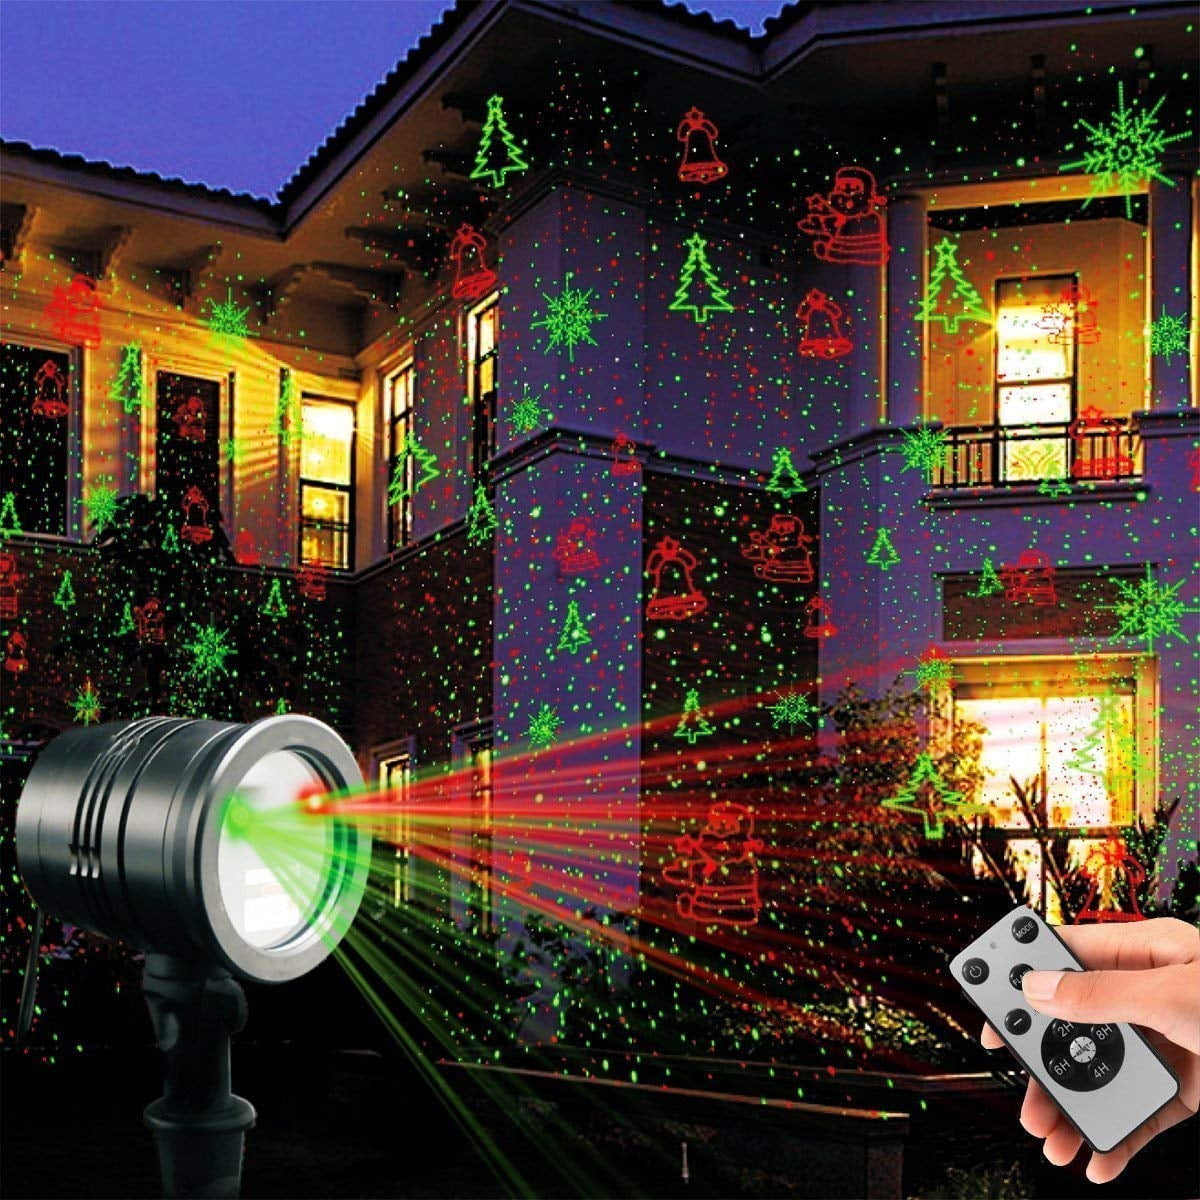 Outdoor LED Moving Laser Projector Light Landscape Xmas Garden Halloween Party 